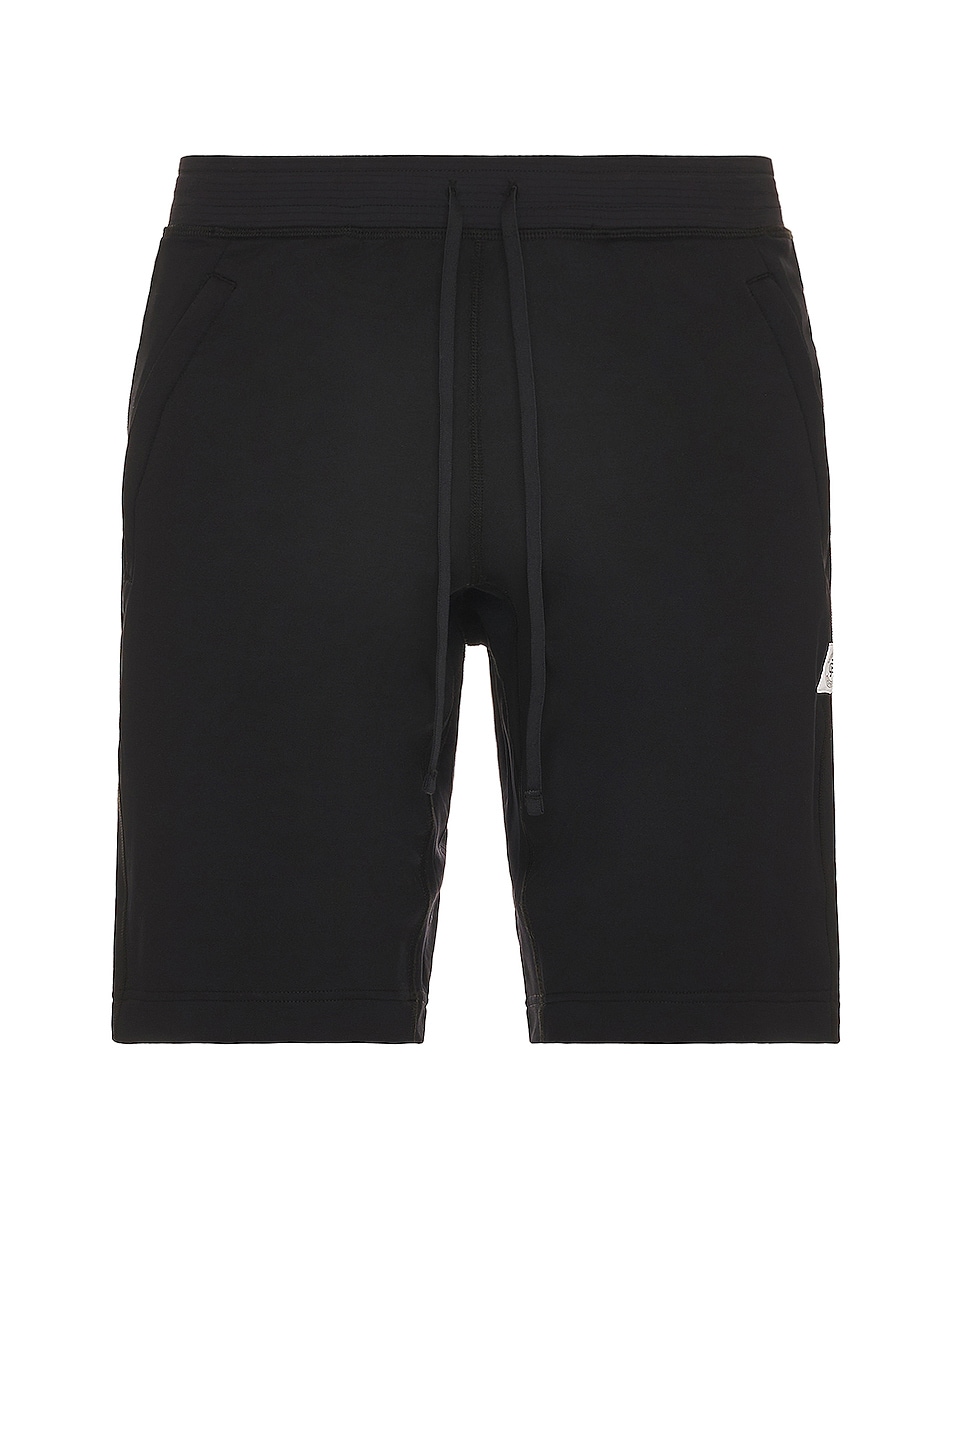 Image 1 of Reigning Champ Short Poloartech Power Stretch Pro in Black